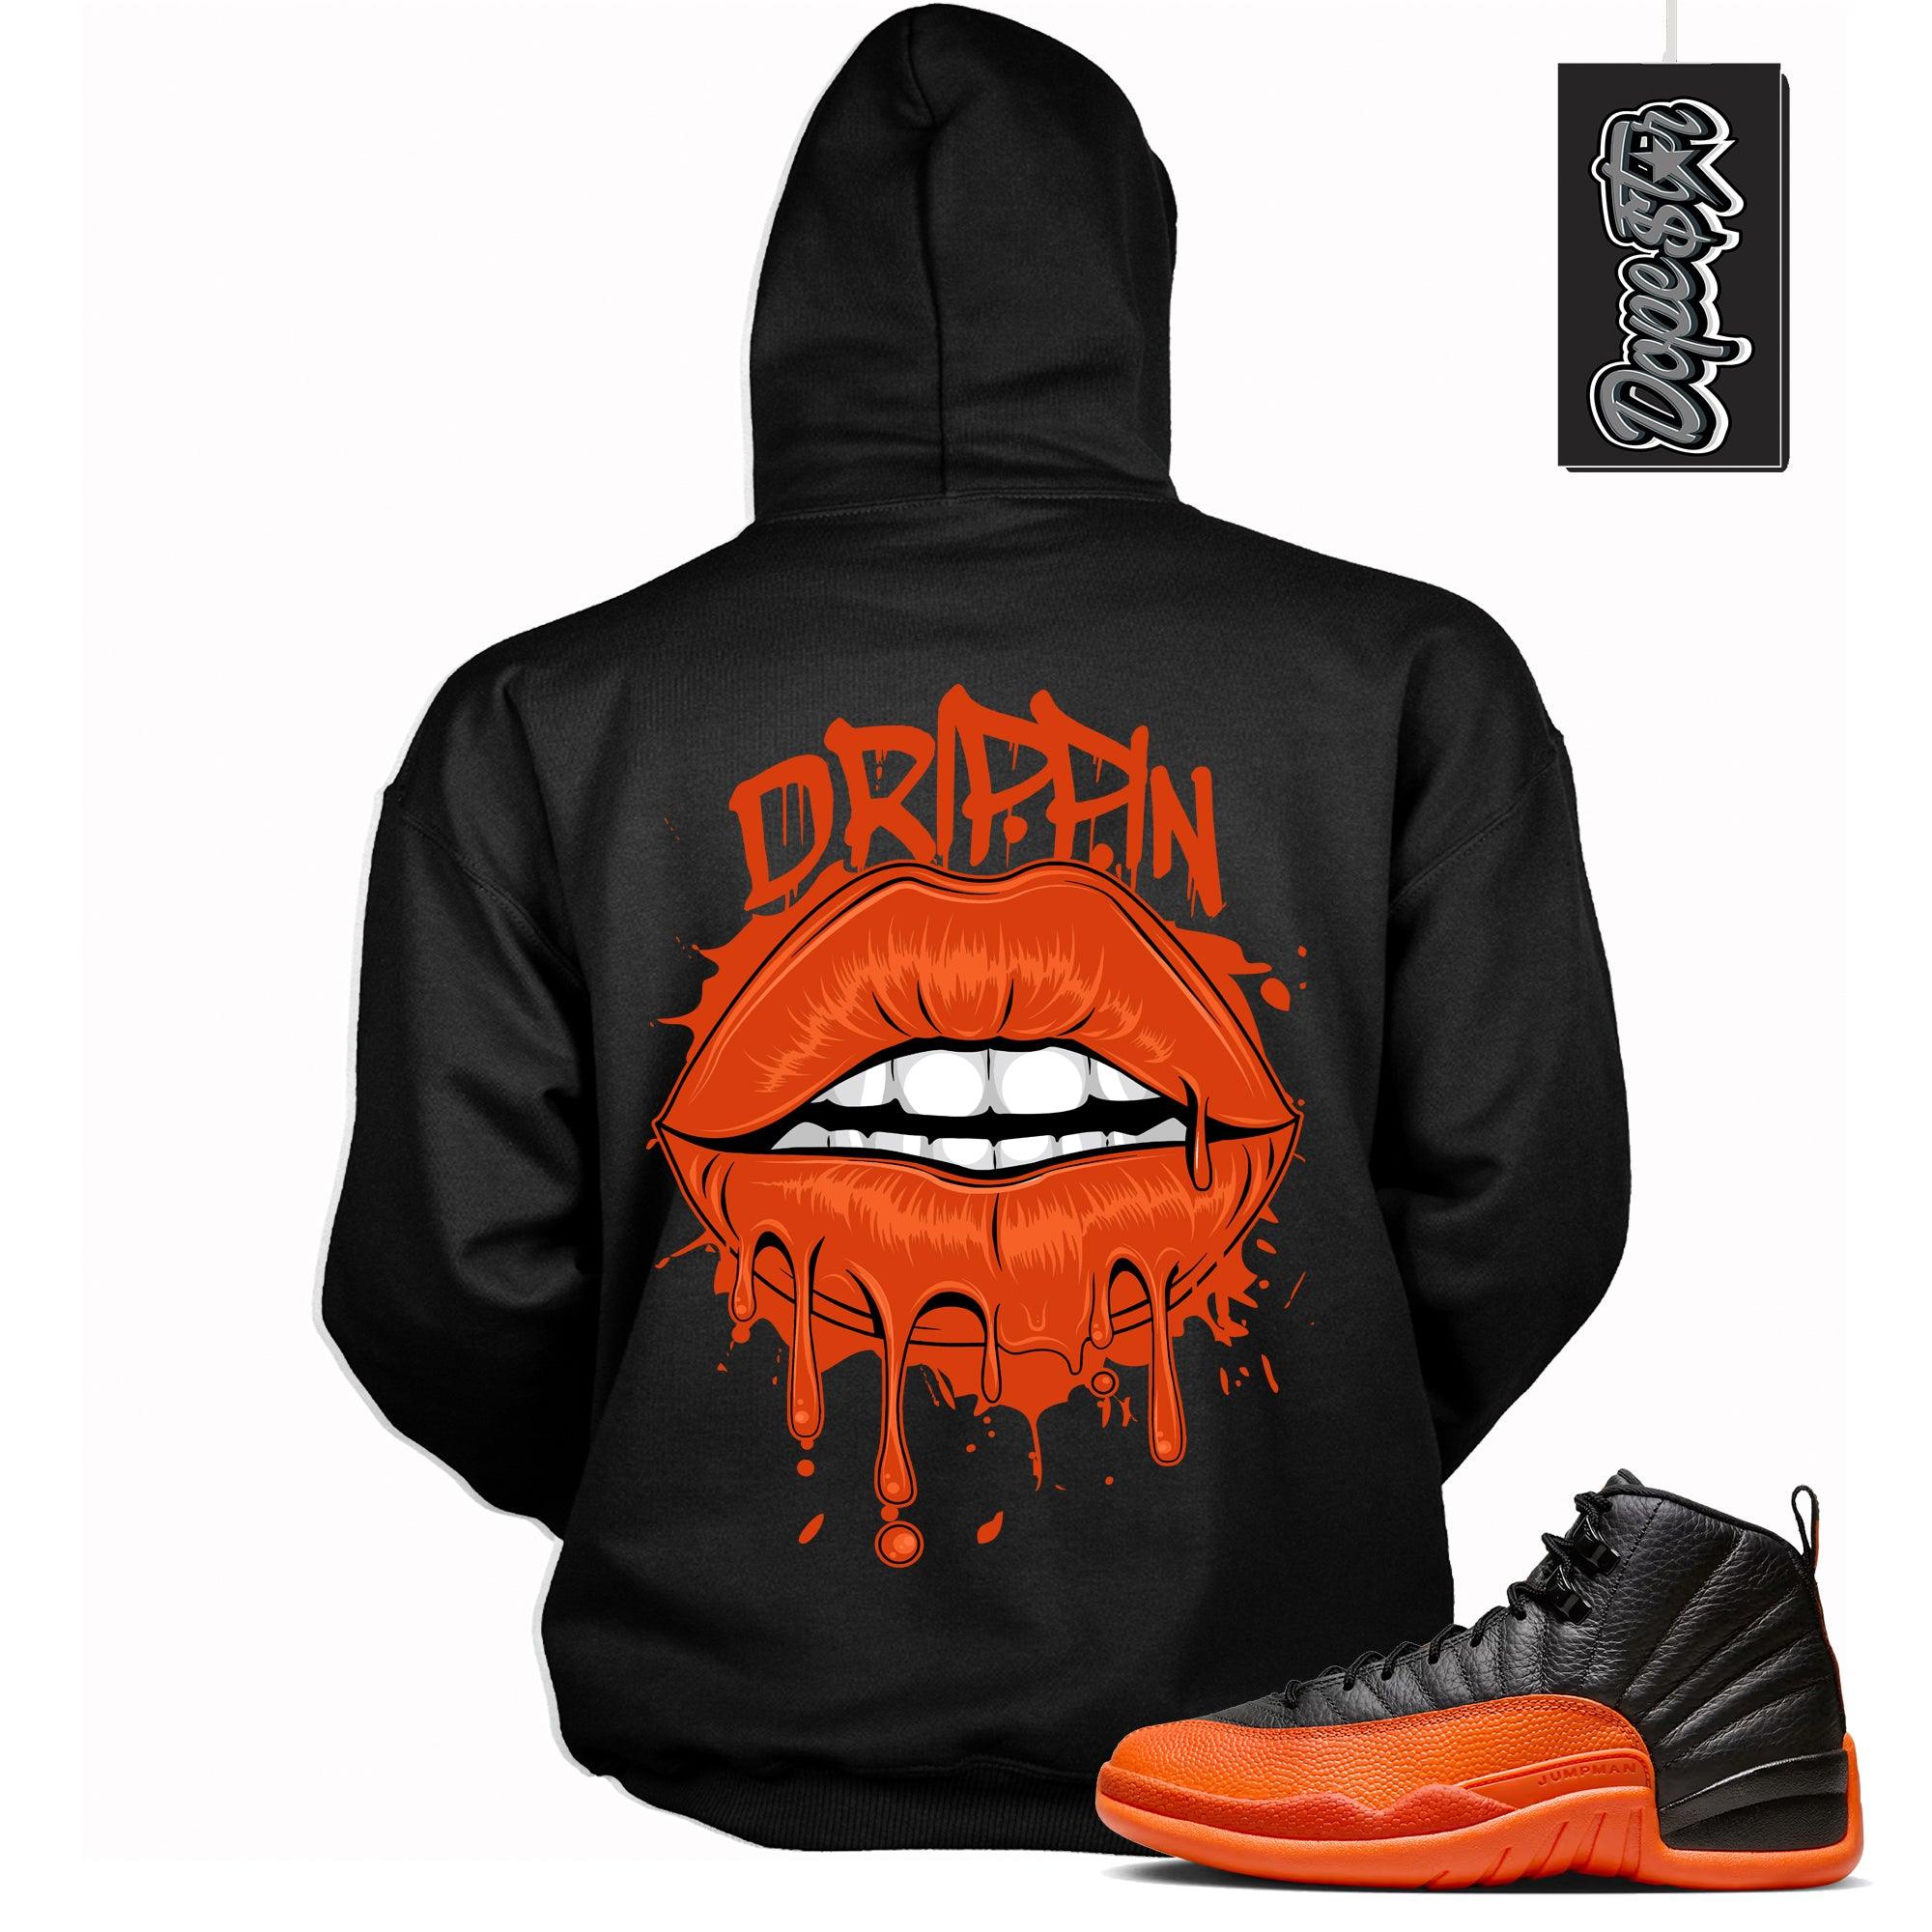 Cool Black Graphic Hoodie with “ Drippin Lips “ print, that perfectly matches Air Jordan 12 Retro WNBA All-Star Brilliant Orange  sneakers